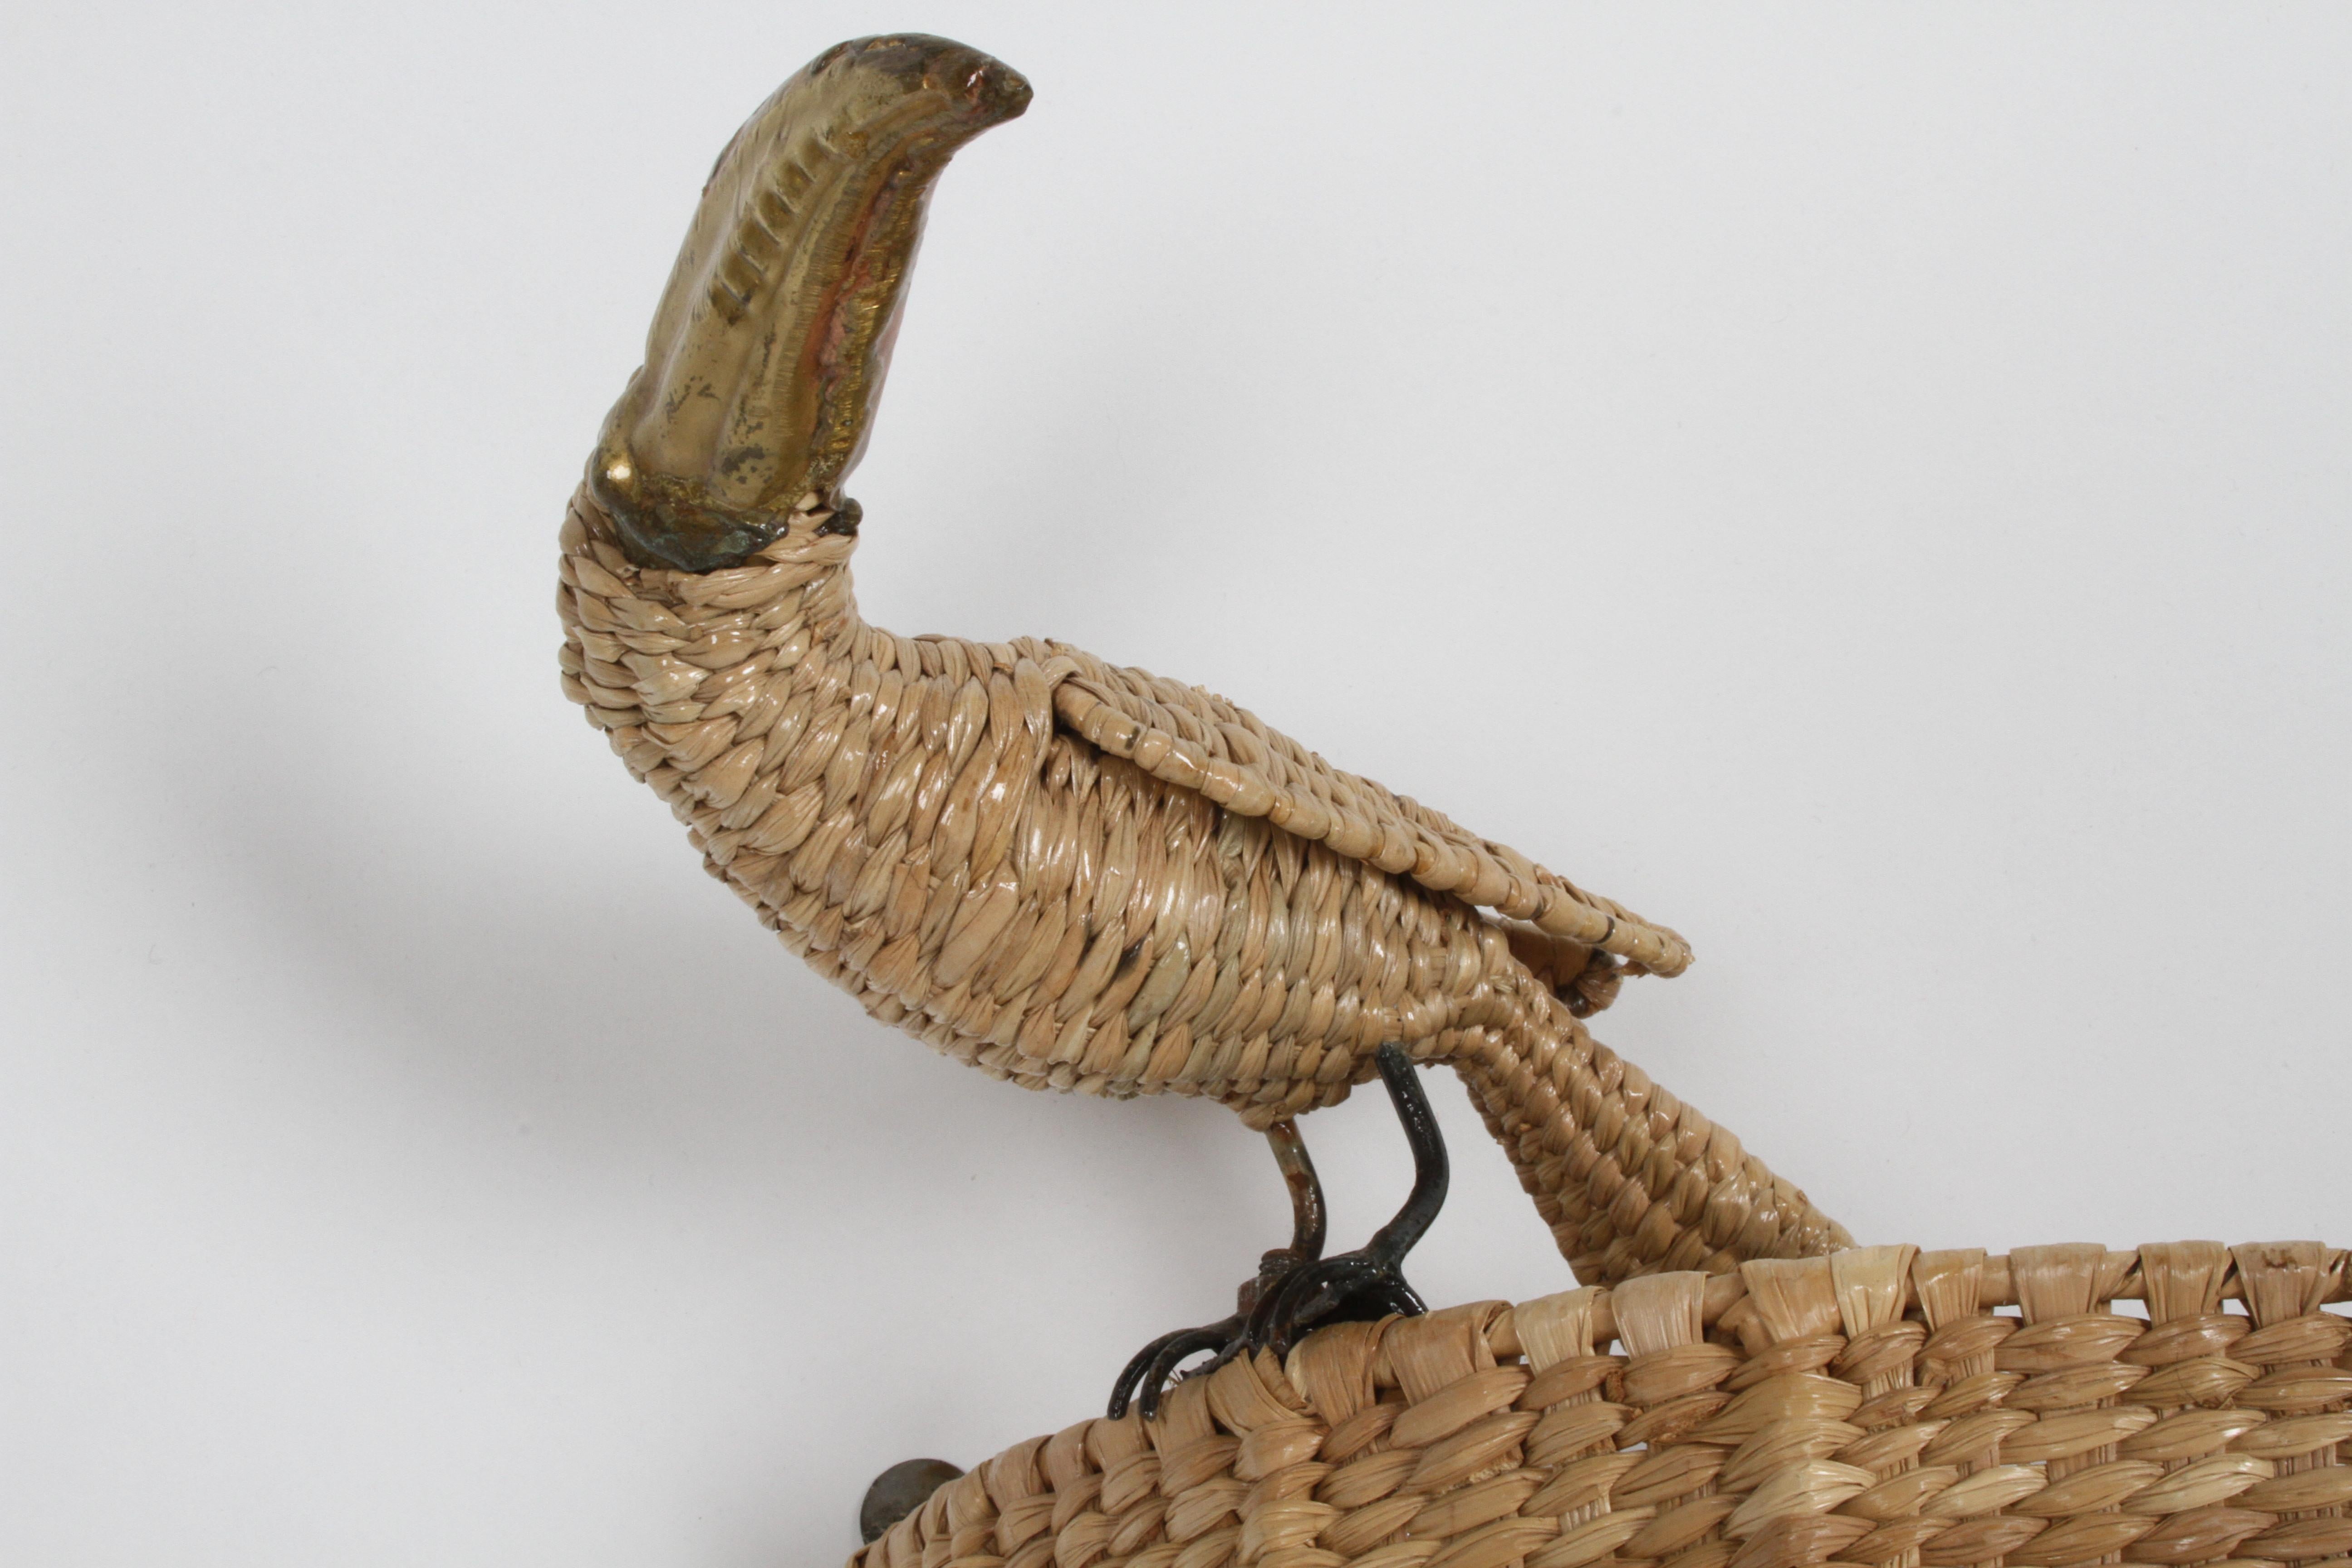 Mario Lopez Torres whimsical wicker Toucan with brass beak wall sconce light. Retains brass medallion on inside : signed Mario Lopez Torres, Tzumindi, Hecho en Mexico, 1974. Includes threaded metal rod to attach light socket and cord, should you